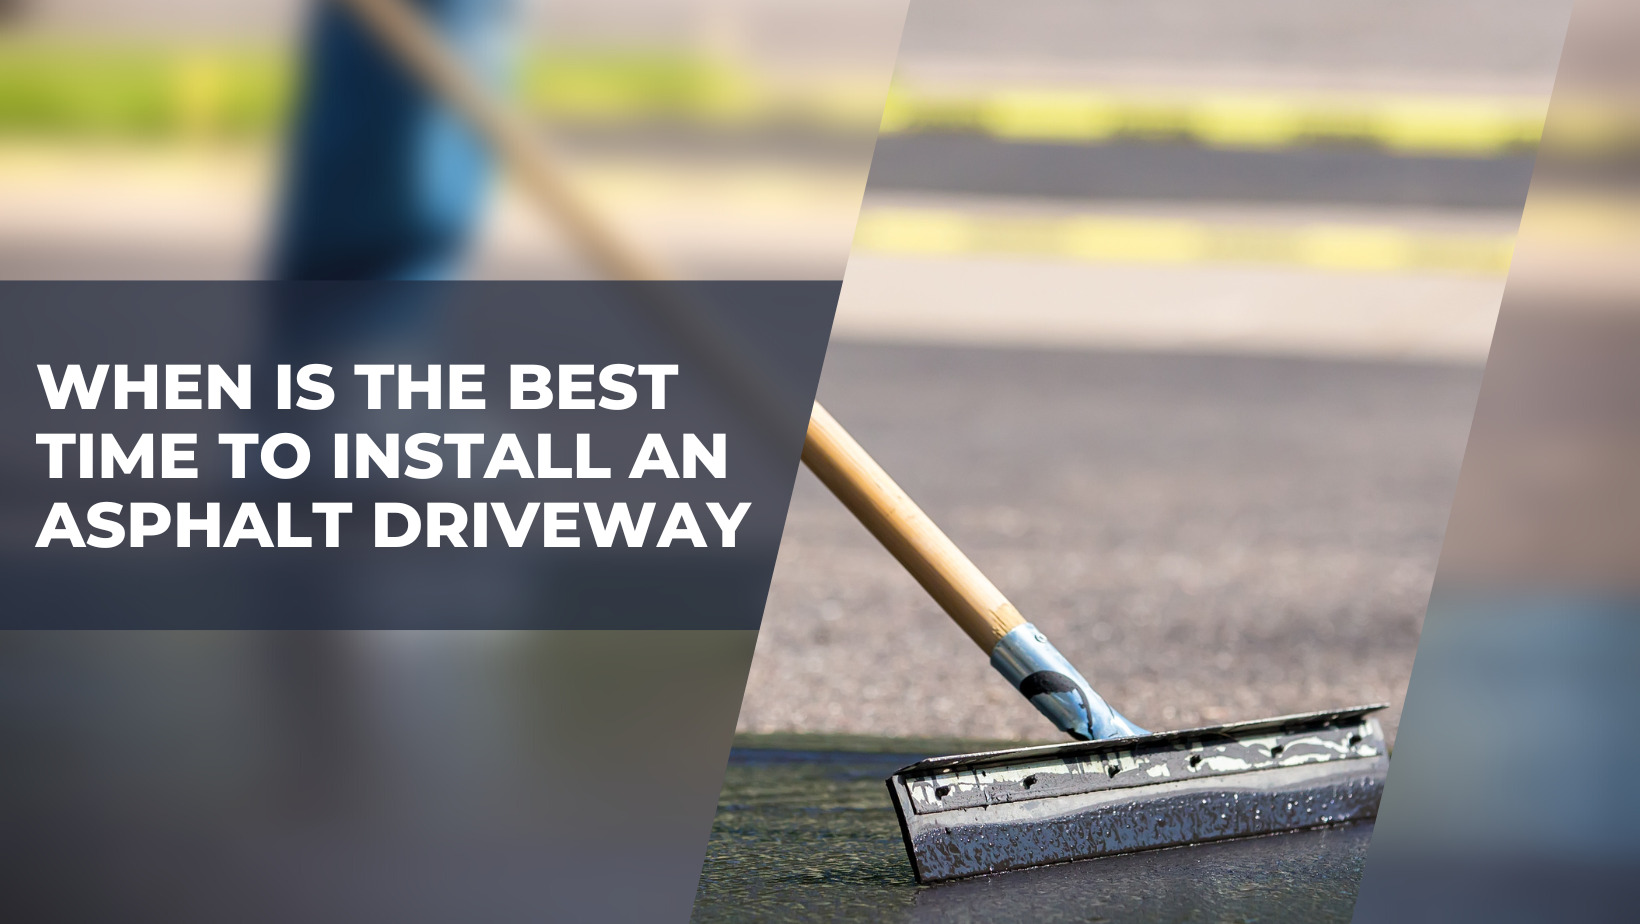 When Is The Best Time To Install An Asphalt Driveway